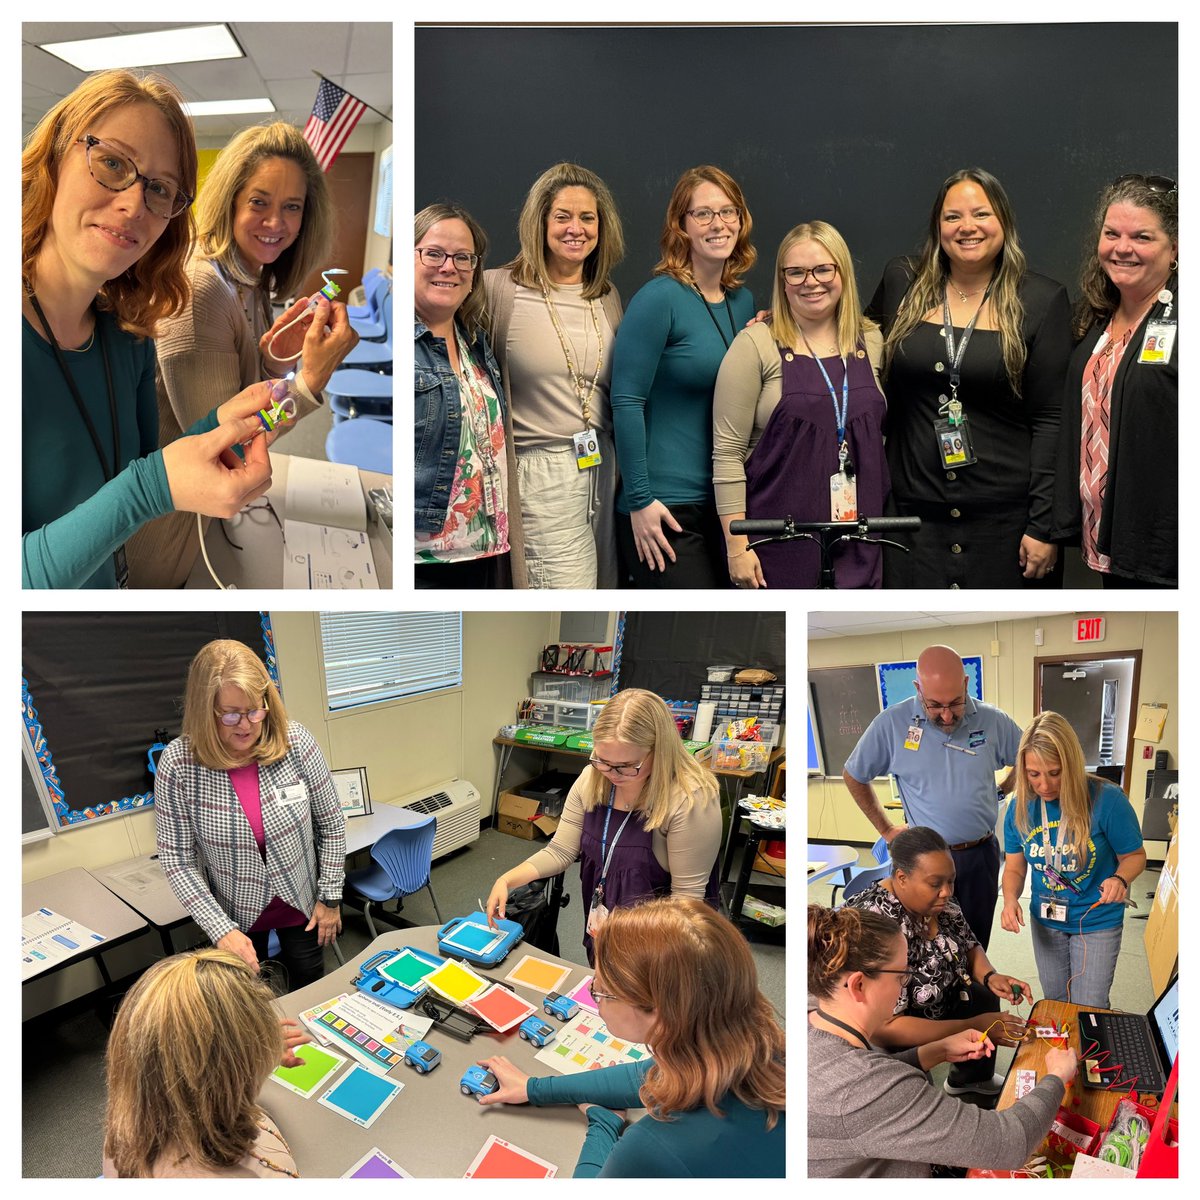 Today we received training for our new STEM Centers, donated to @ihes_braves , @MtHopeNanjemoy , and @MalcolmMustangs by the @CalRipkenSrFdn. Exciting enrichment to come! @CCPS